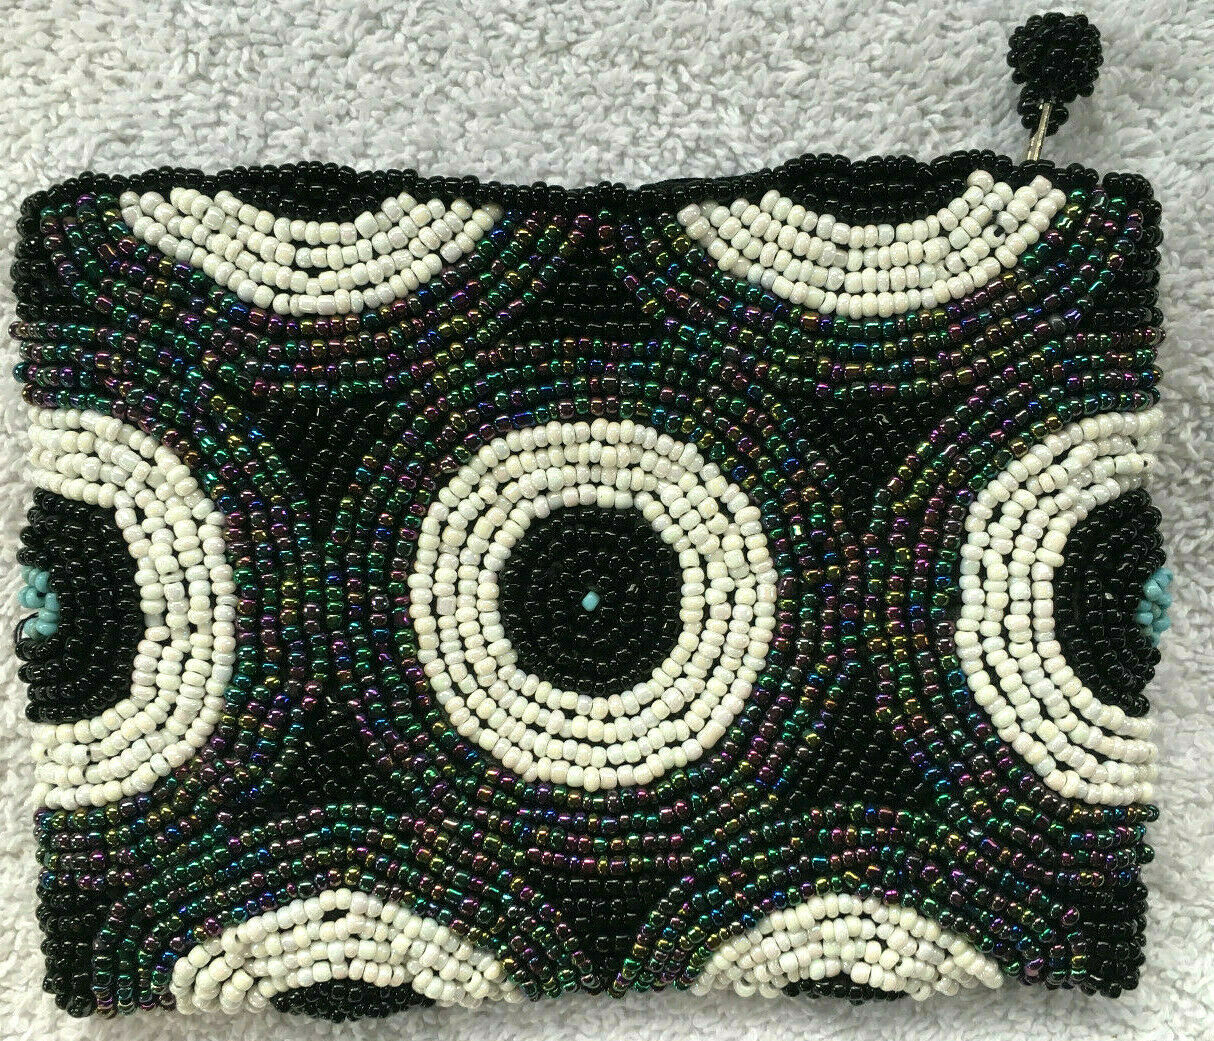 Beaded Coin Purse Circles Zip Close Black White Multi 3.75" X 5.25" - Lovely!